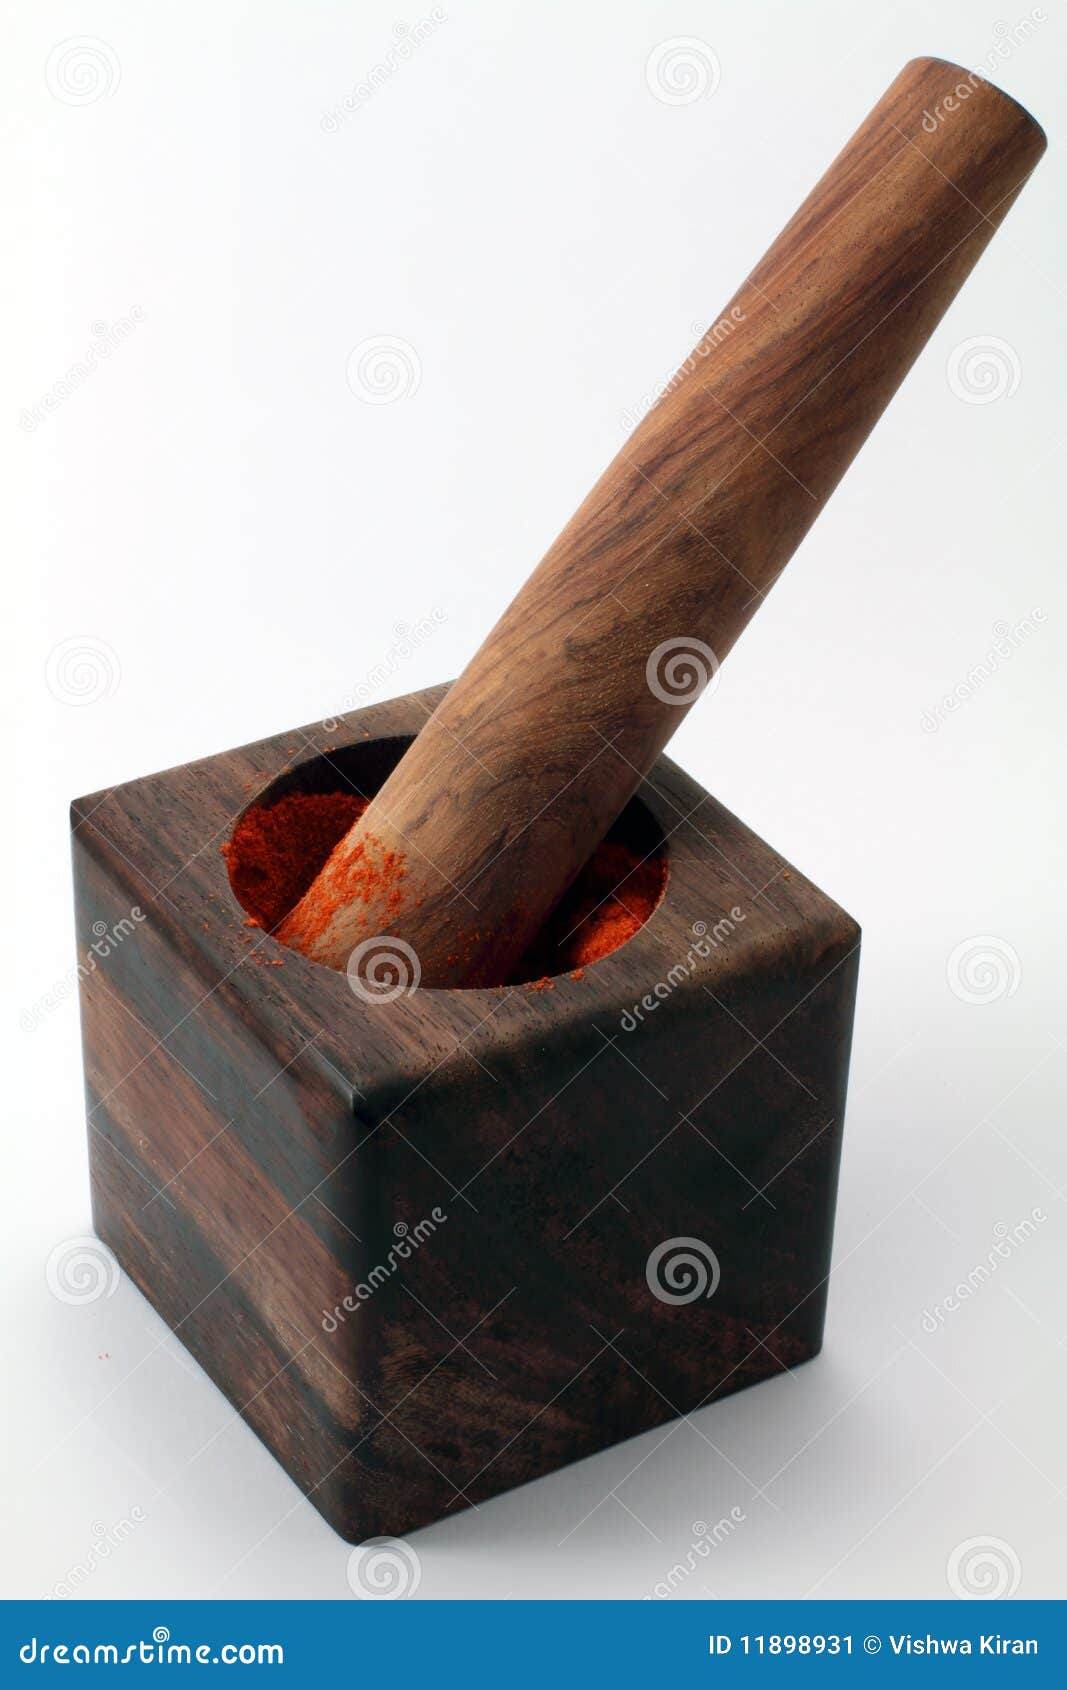 a wooden mortar and pestle